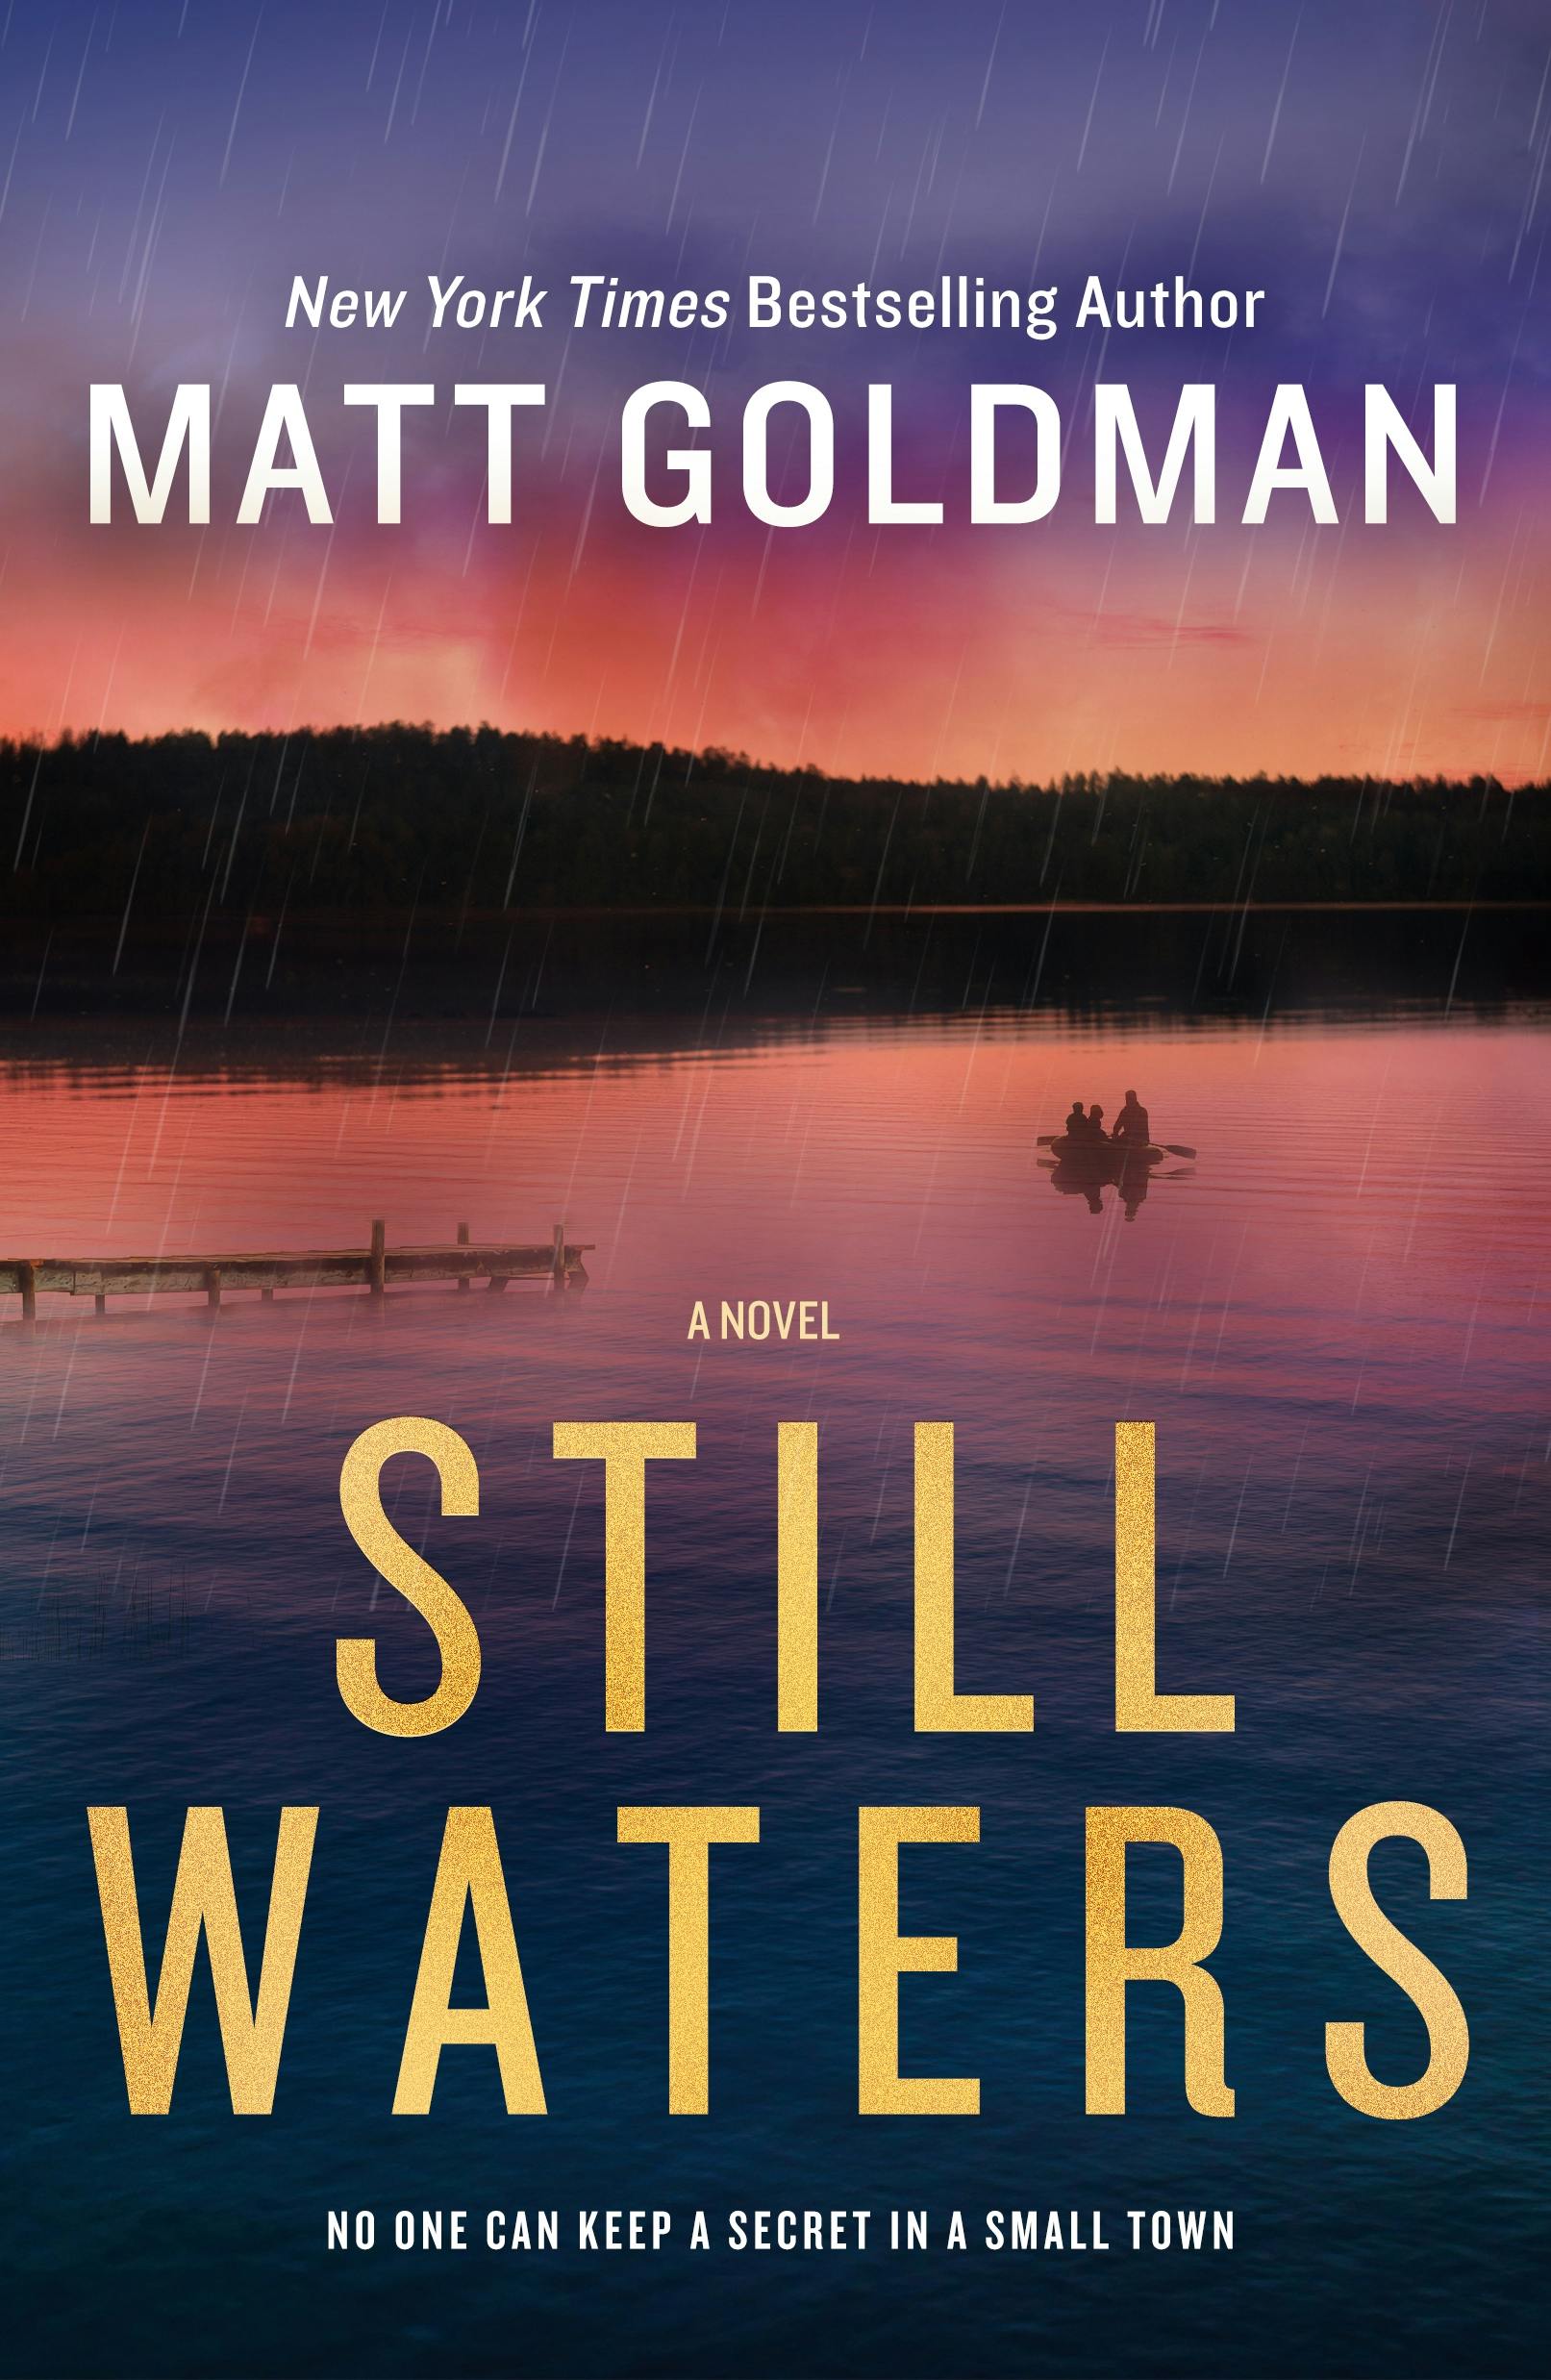 Cover for the book titled as: Still Waters